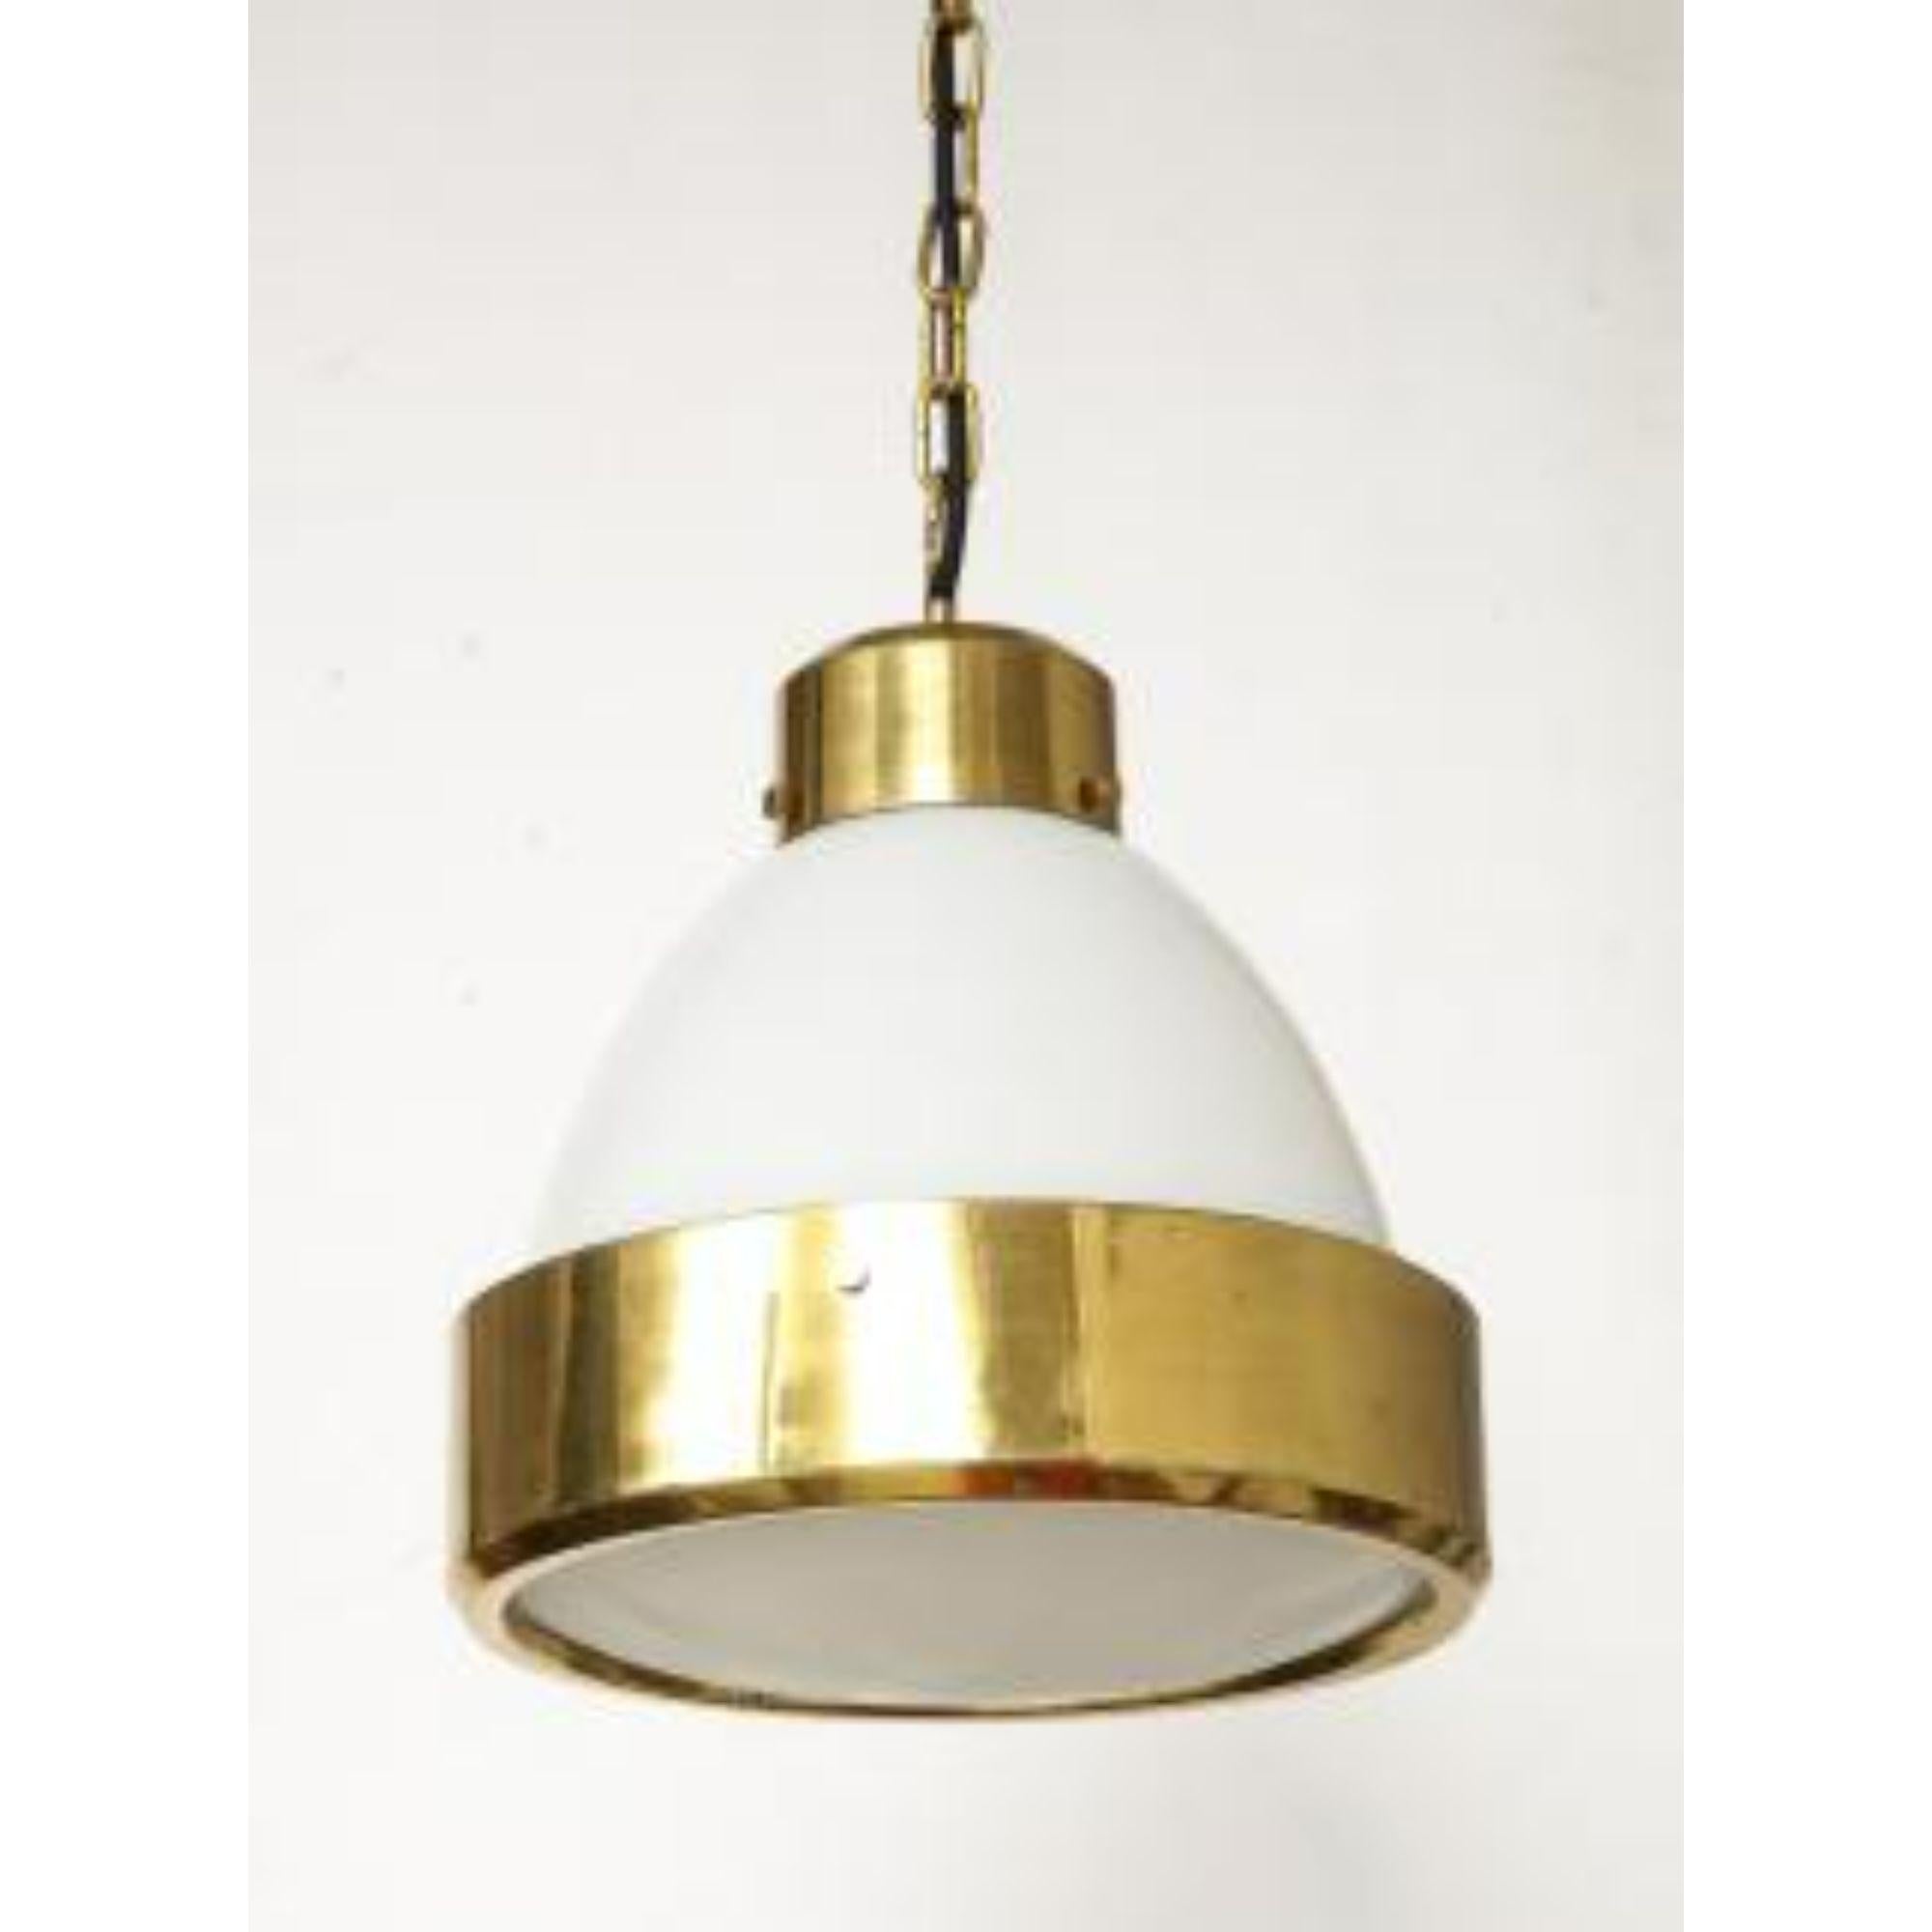 Modern Midcentury Pendant in Brass and White Opaline Glass, Mid-20th Century For Sale